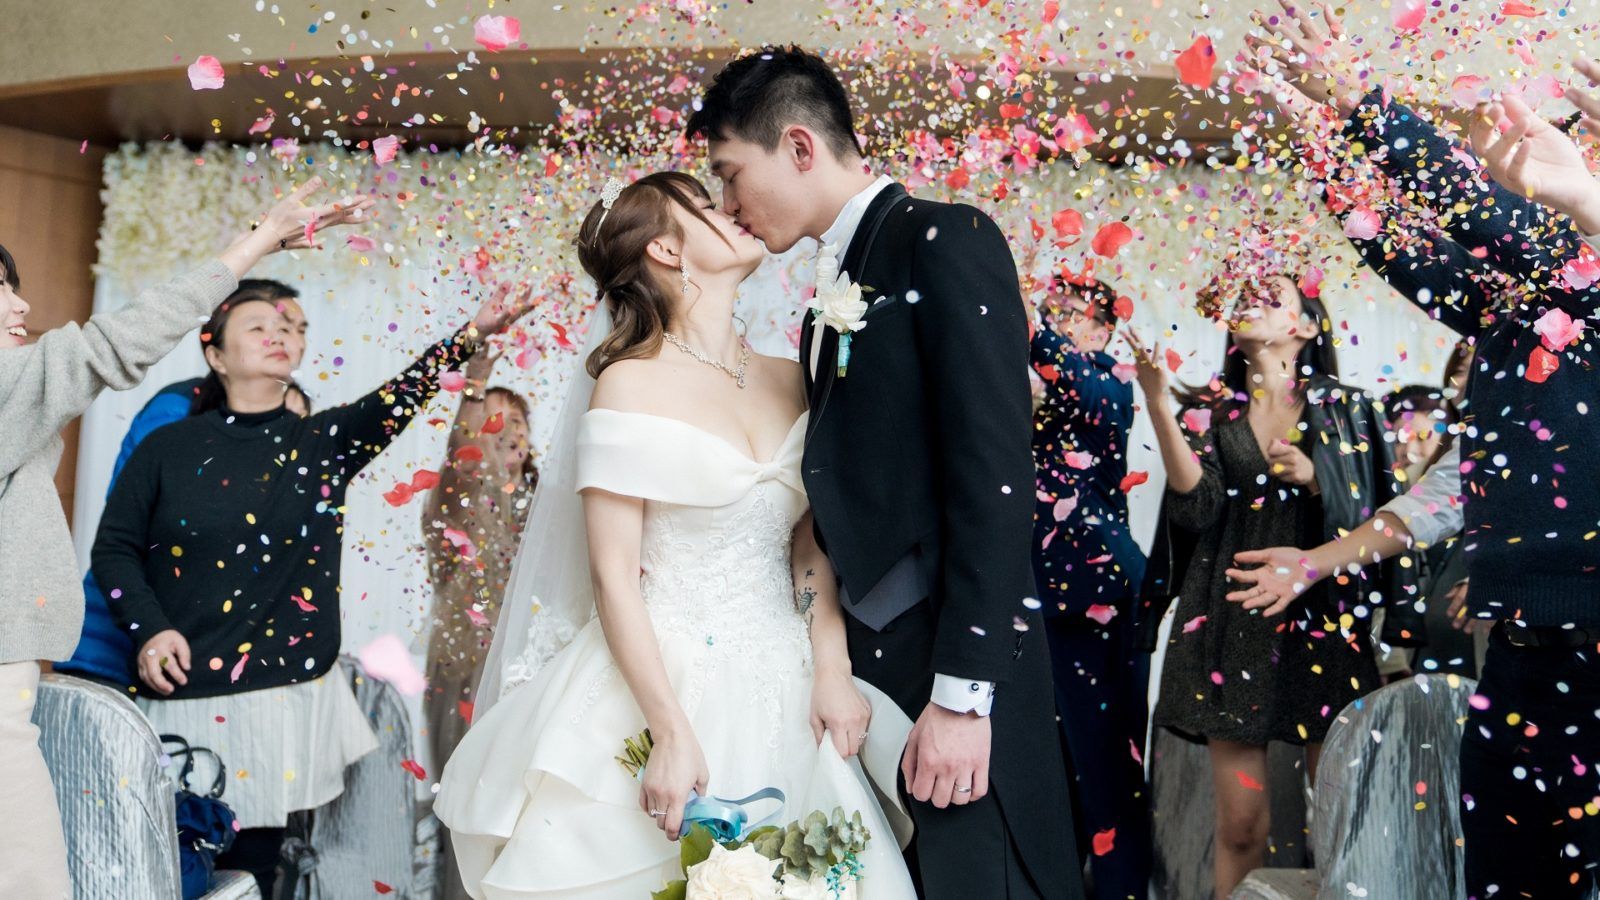 A simple guide to getting married in Hong Kong